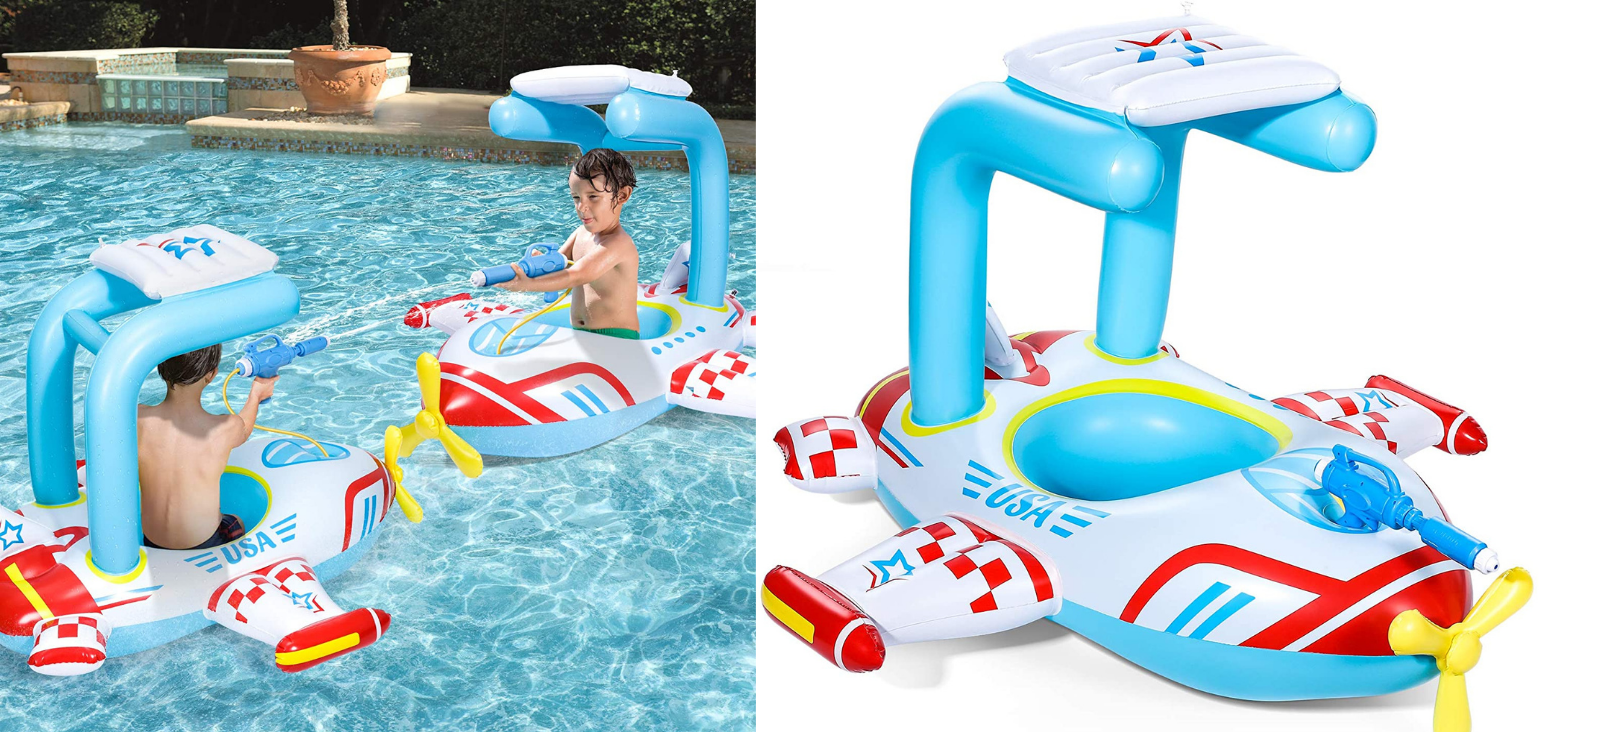 This airplane pool float with a built-in water gun will soak your summer in fun